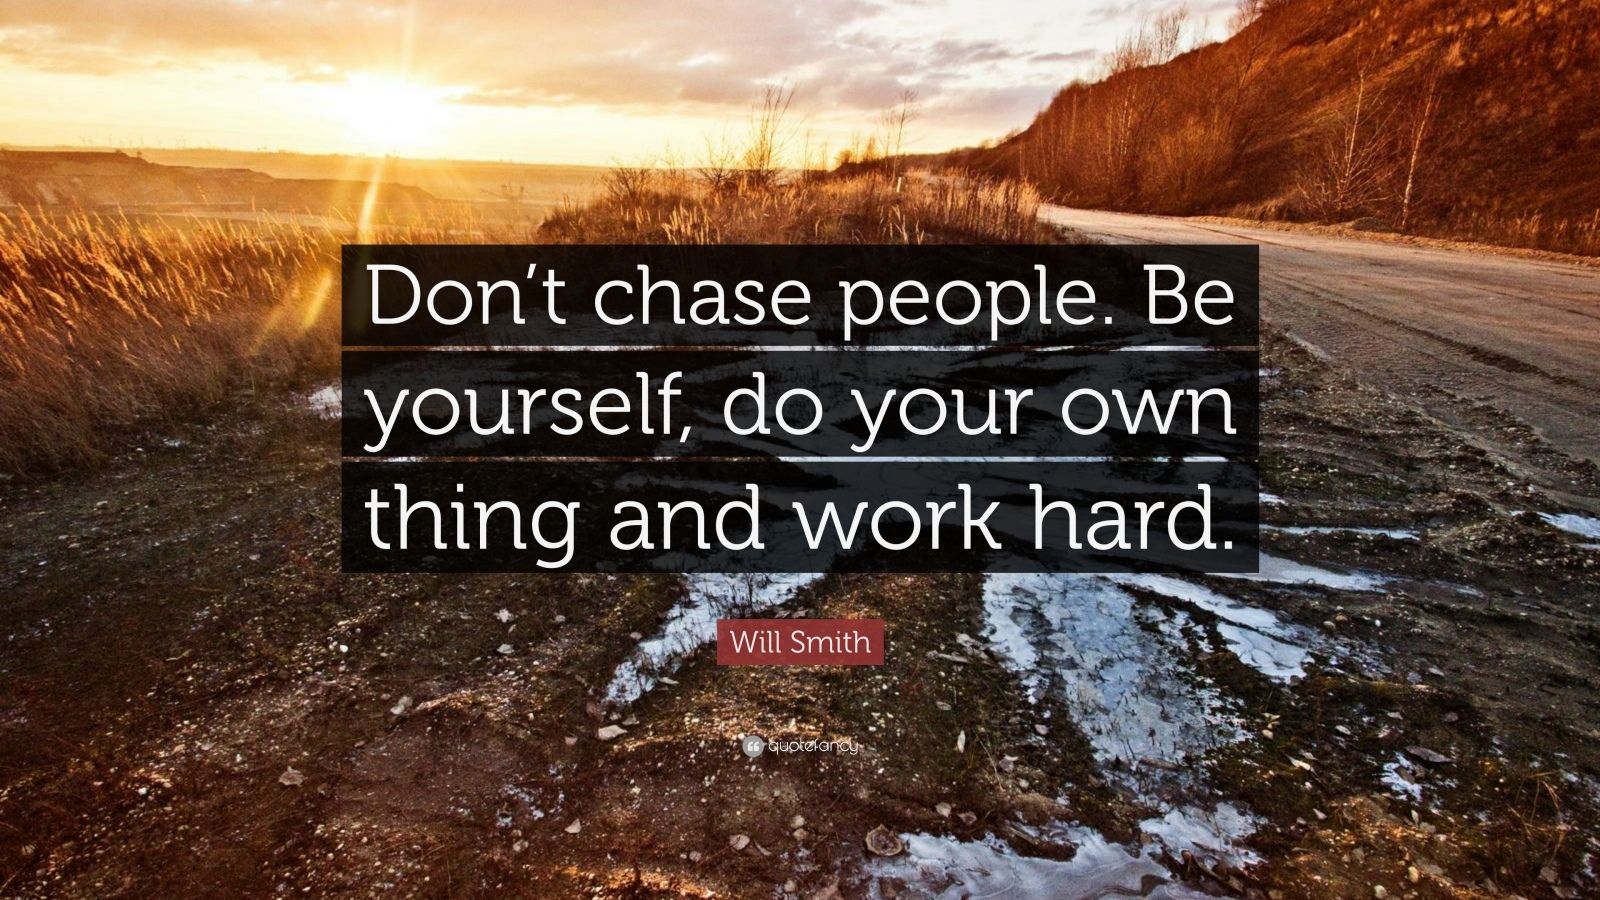 Will Smith Quote “Don t chase people Be yourself do your